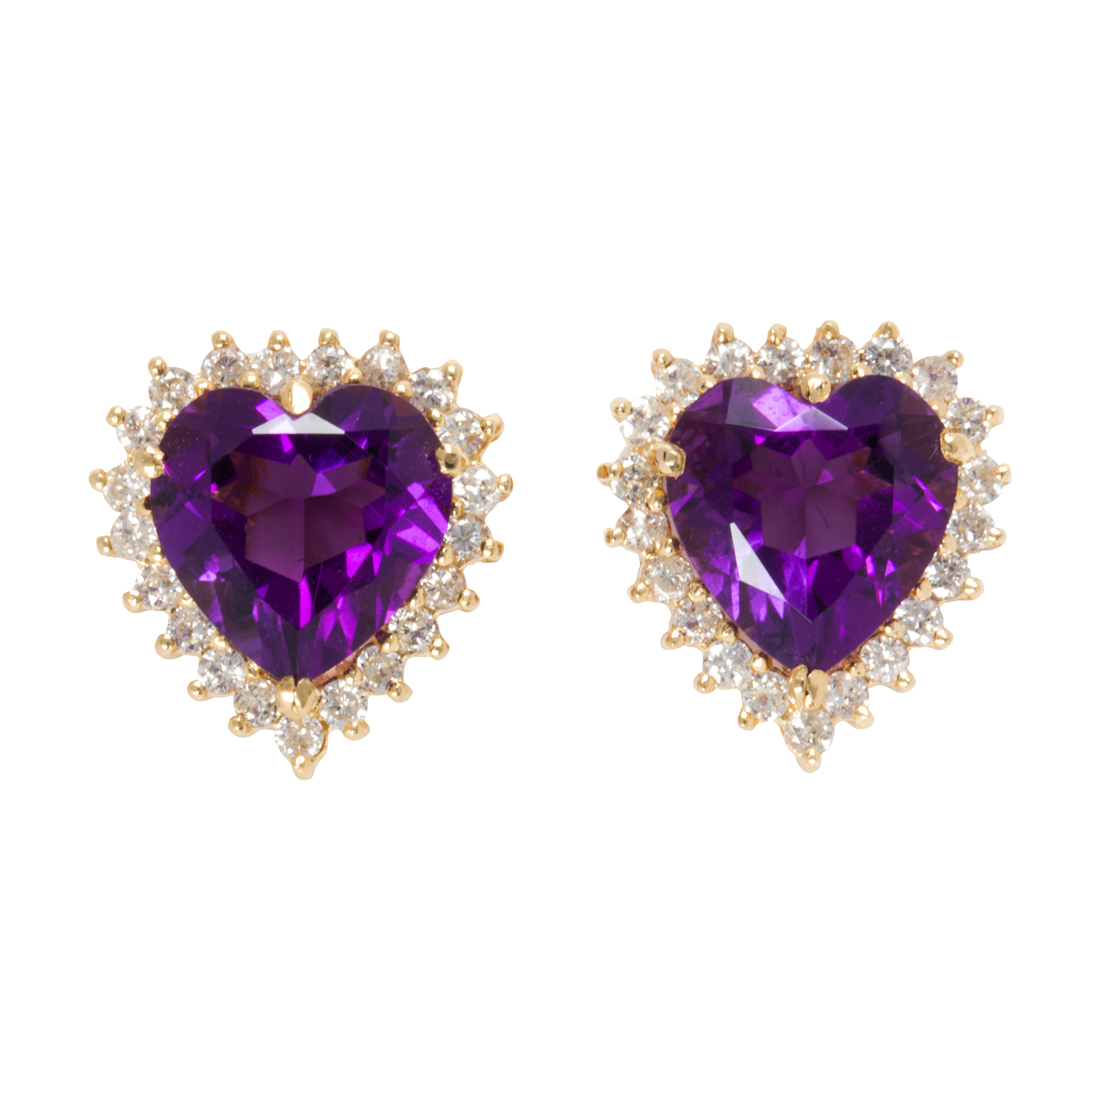 A PAIR OF AMETHYST DIAMOND AND 3cde9a